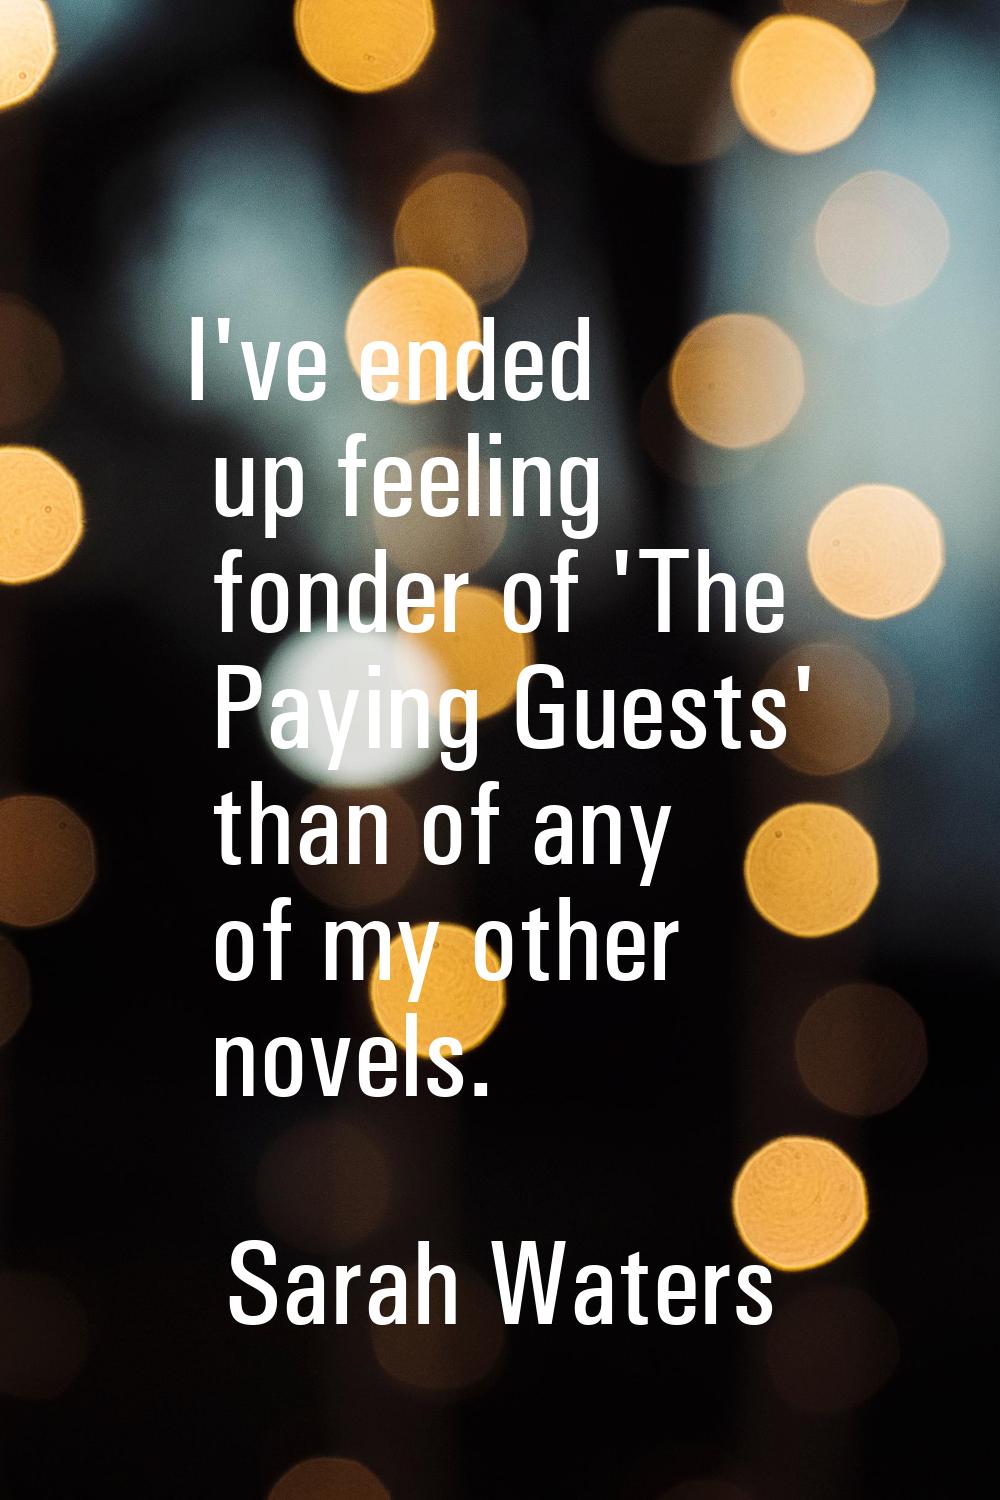 I've ended up feeling fonder of 'The Paying Guests' than of any of my other novels.